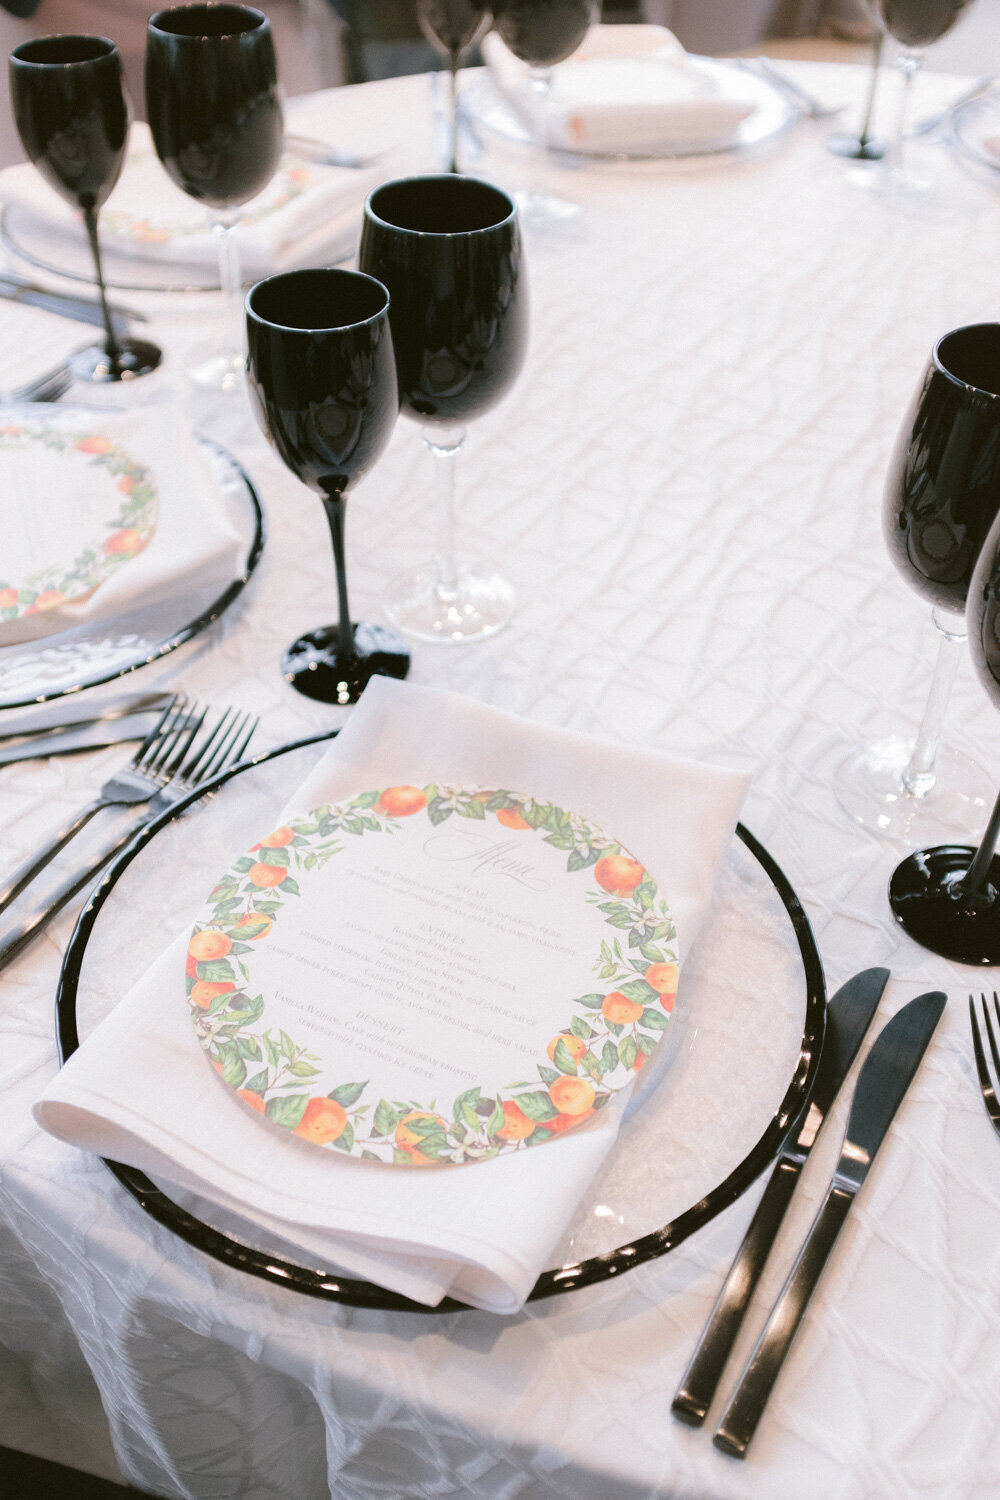 Elegant wedding table with white and black plate, black cutleries and wine glasses